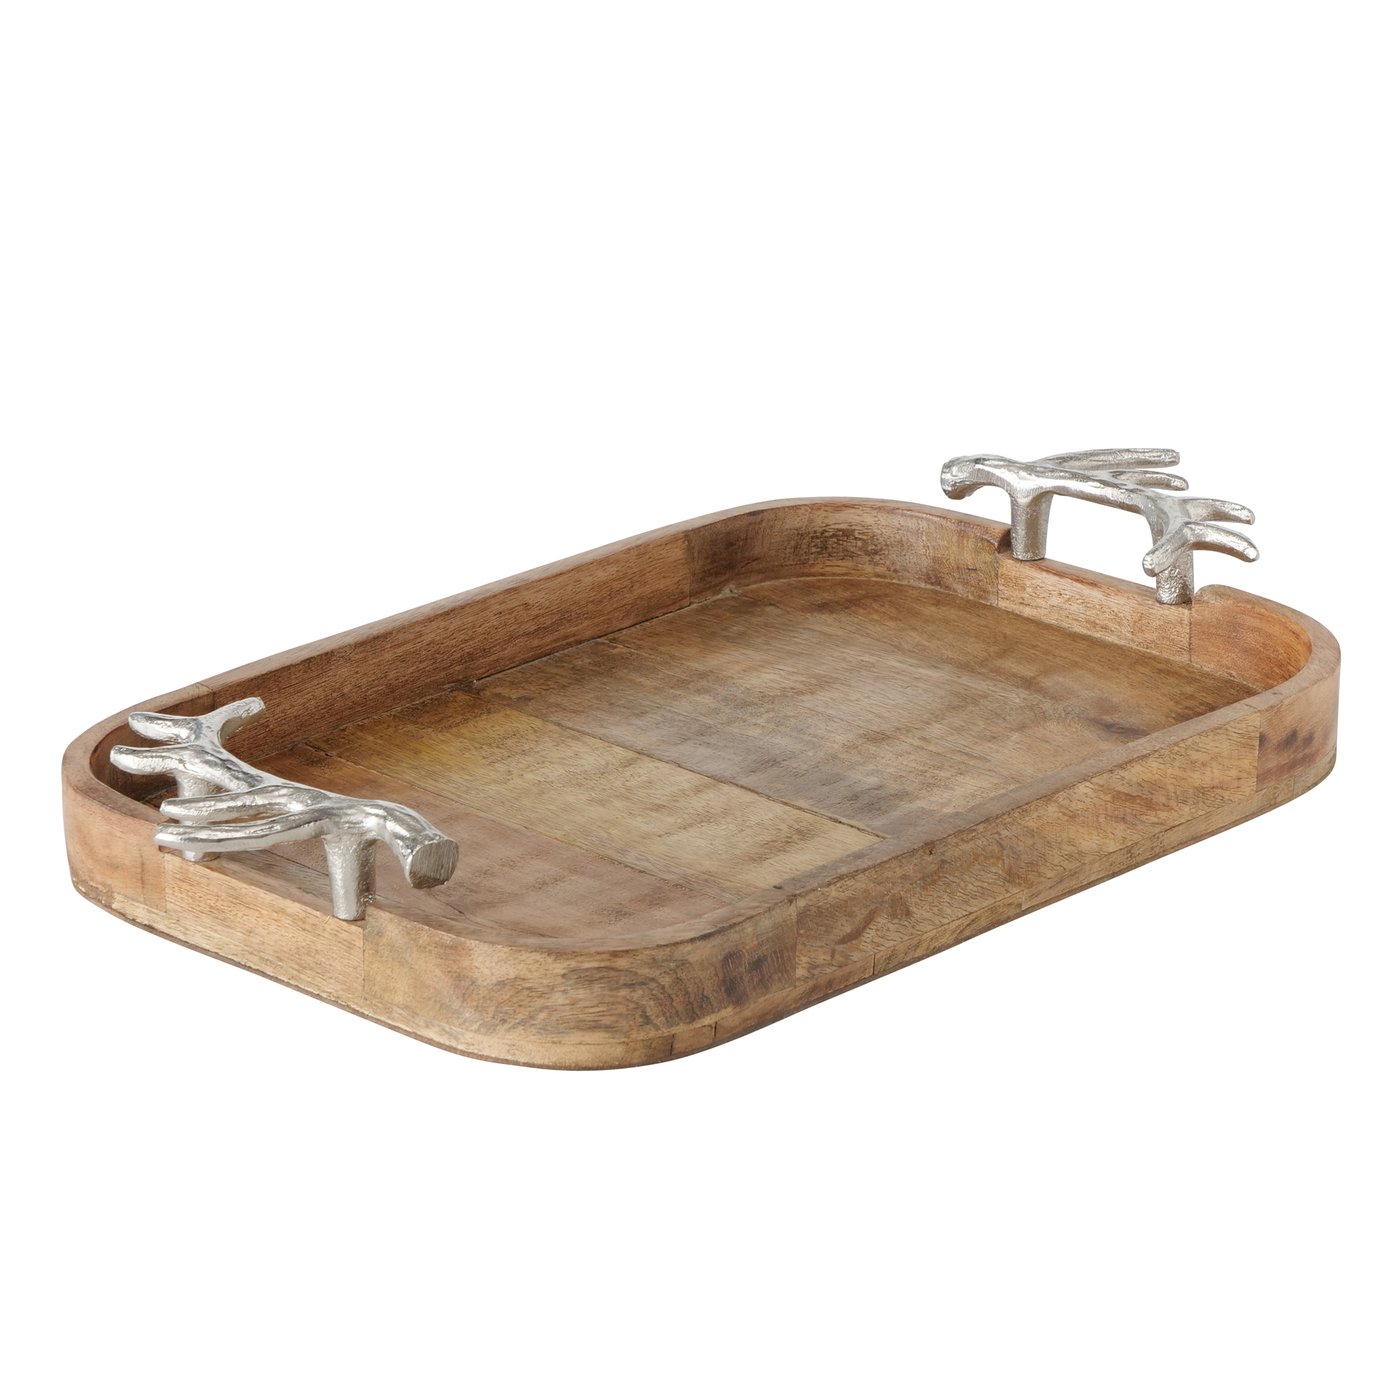 &Quirky Silver Antler Handled Wooden Serving Tray